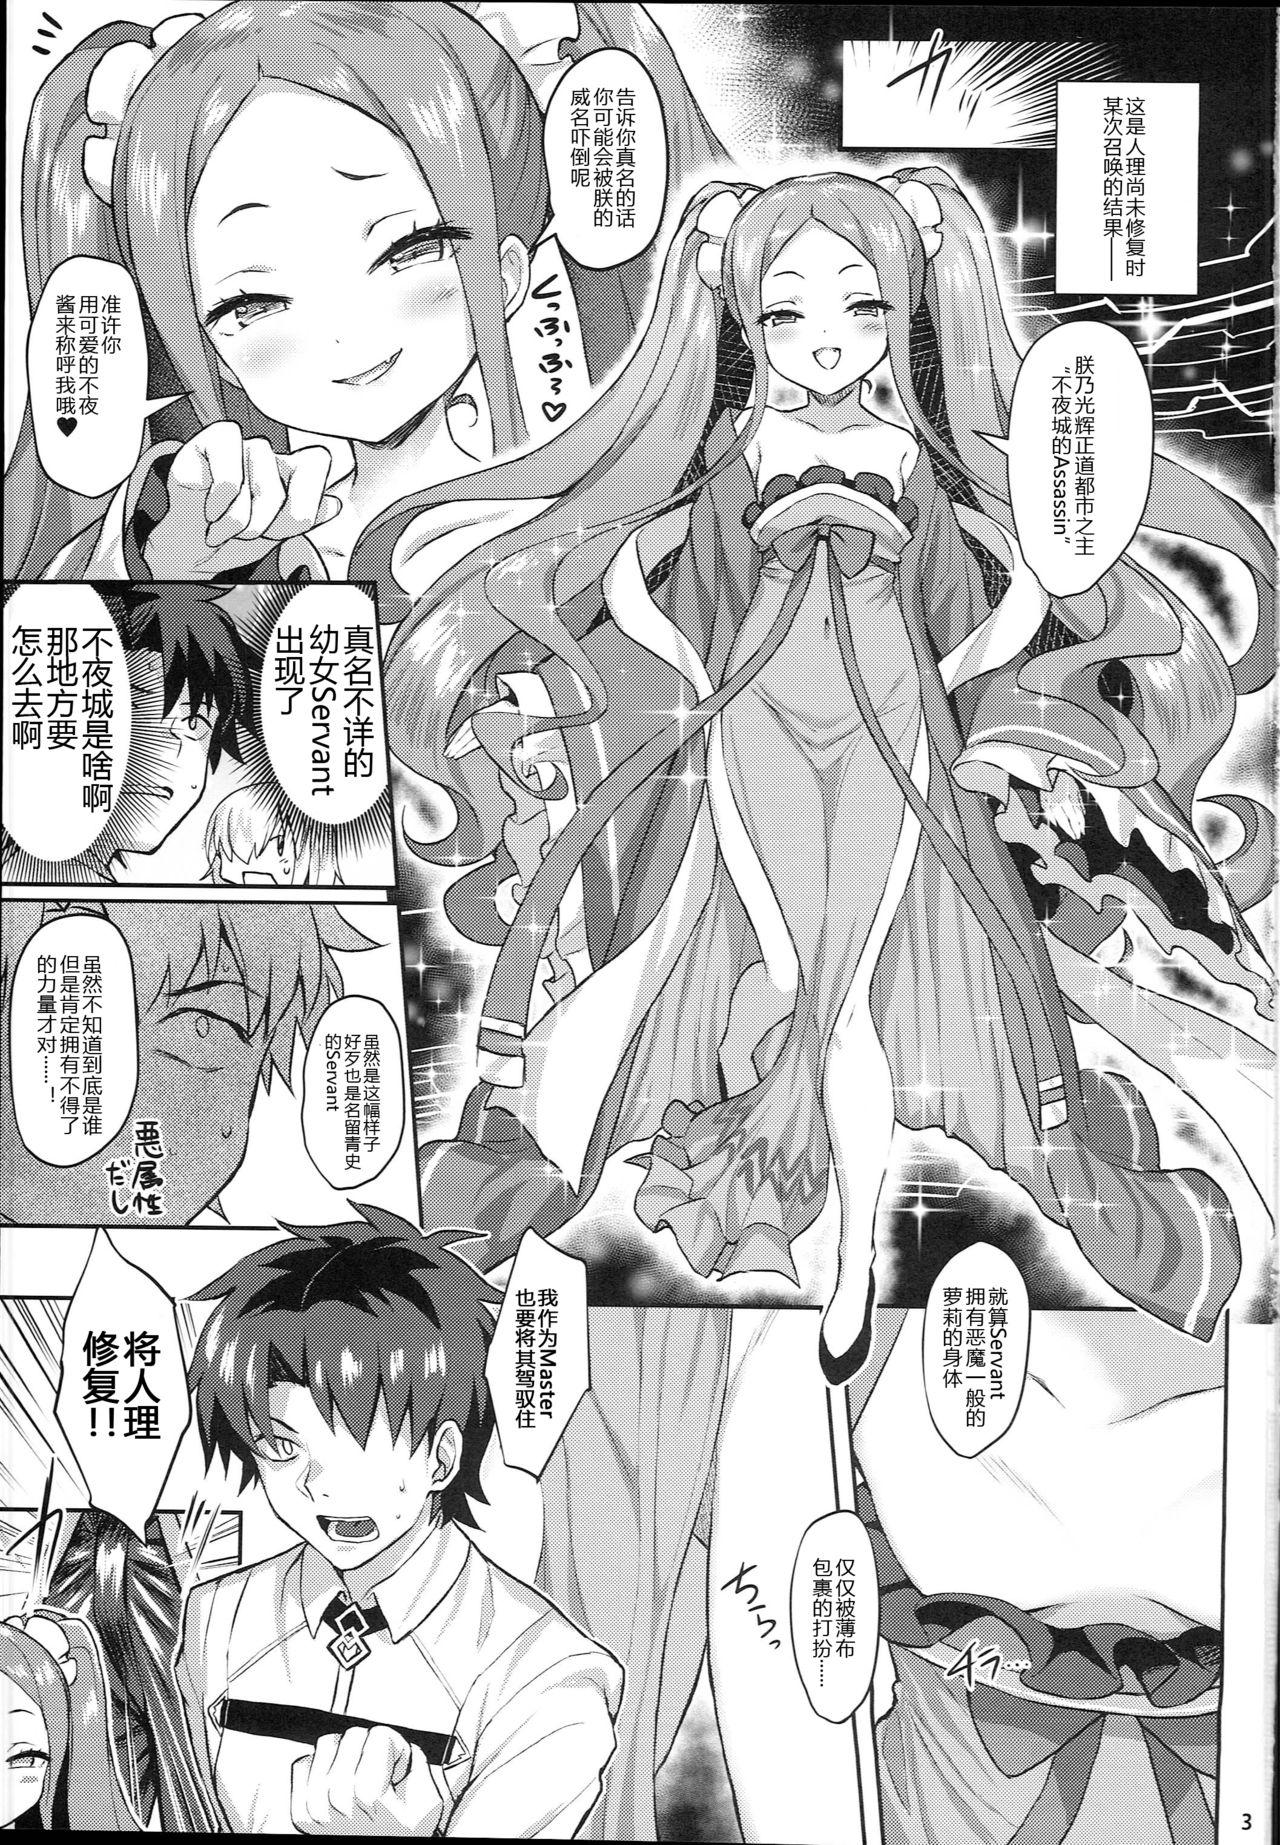 Cuckold Fuya Syndrome - Sleepless Syndrome - Fate grand order Dutch - Page 4